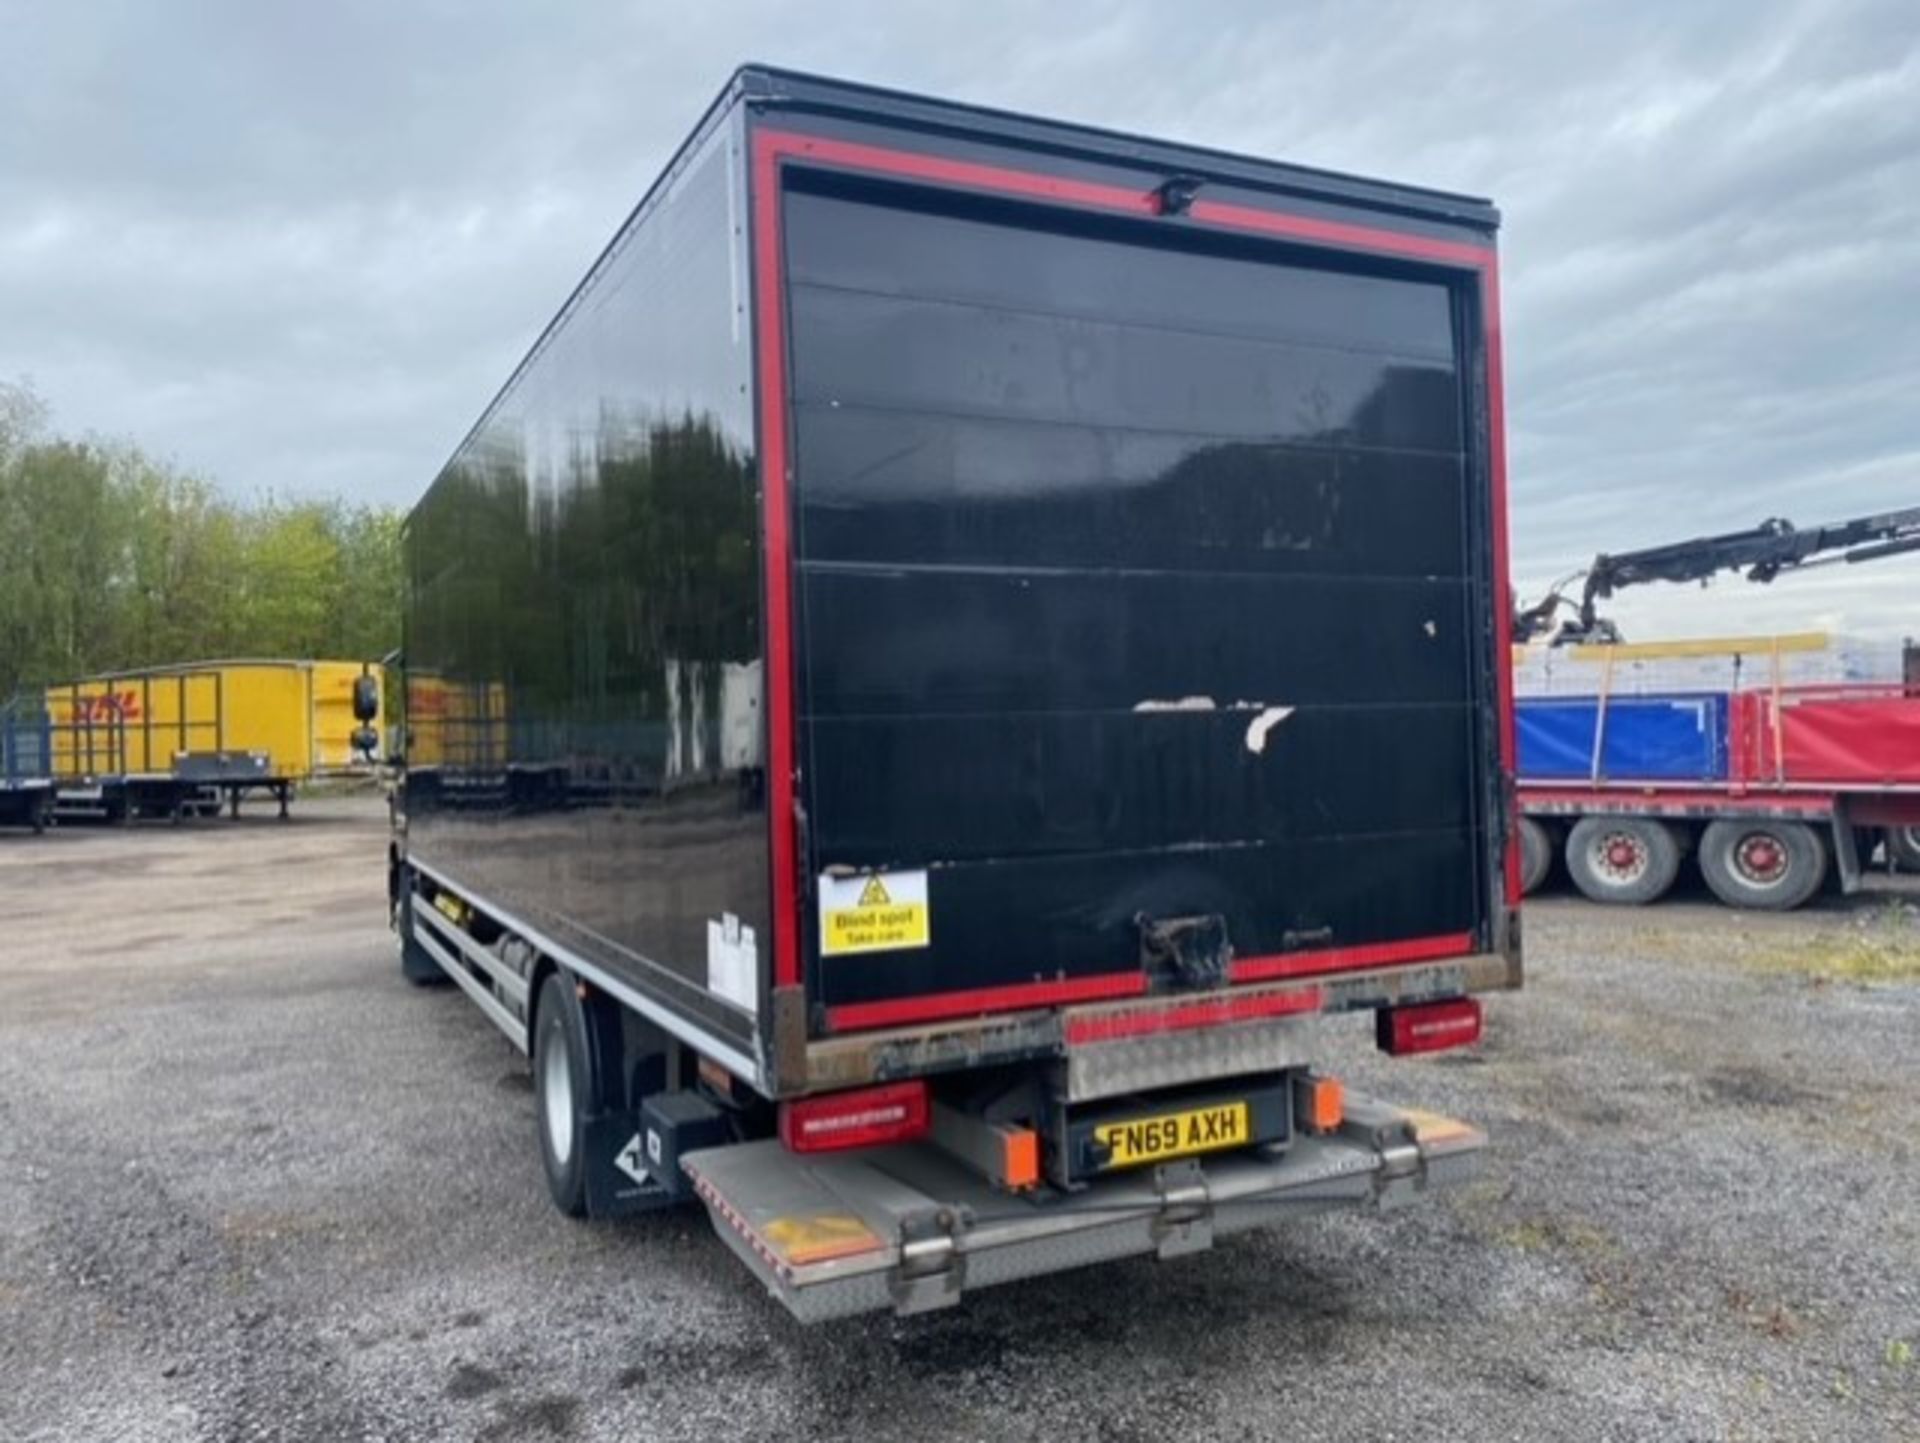 2019, DAF CF 260 FA - FN69 AXH (18 Ton Rigid Truck with Tail Lift) - Image 22 of 22